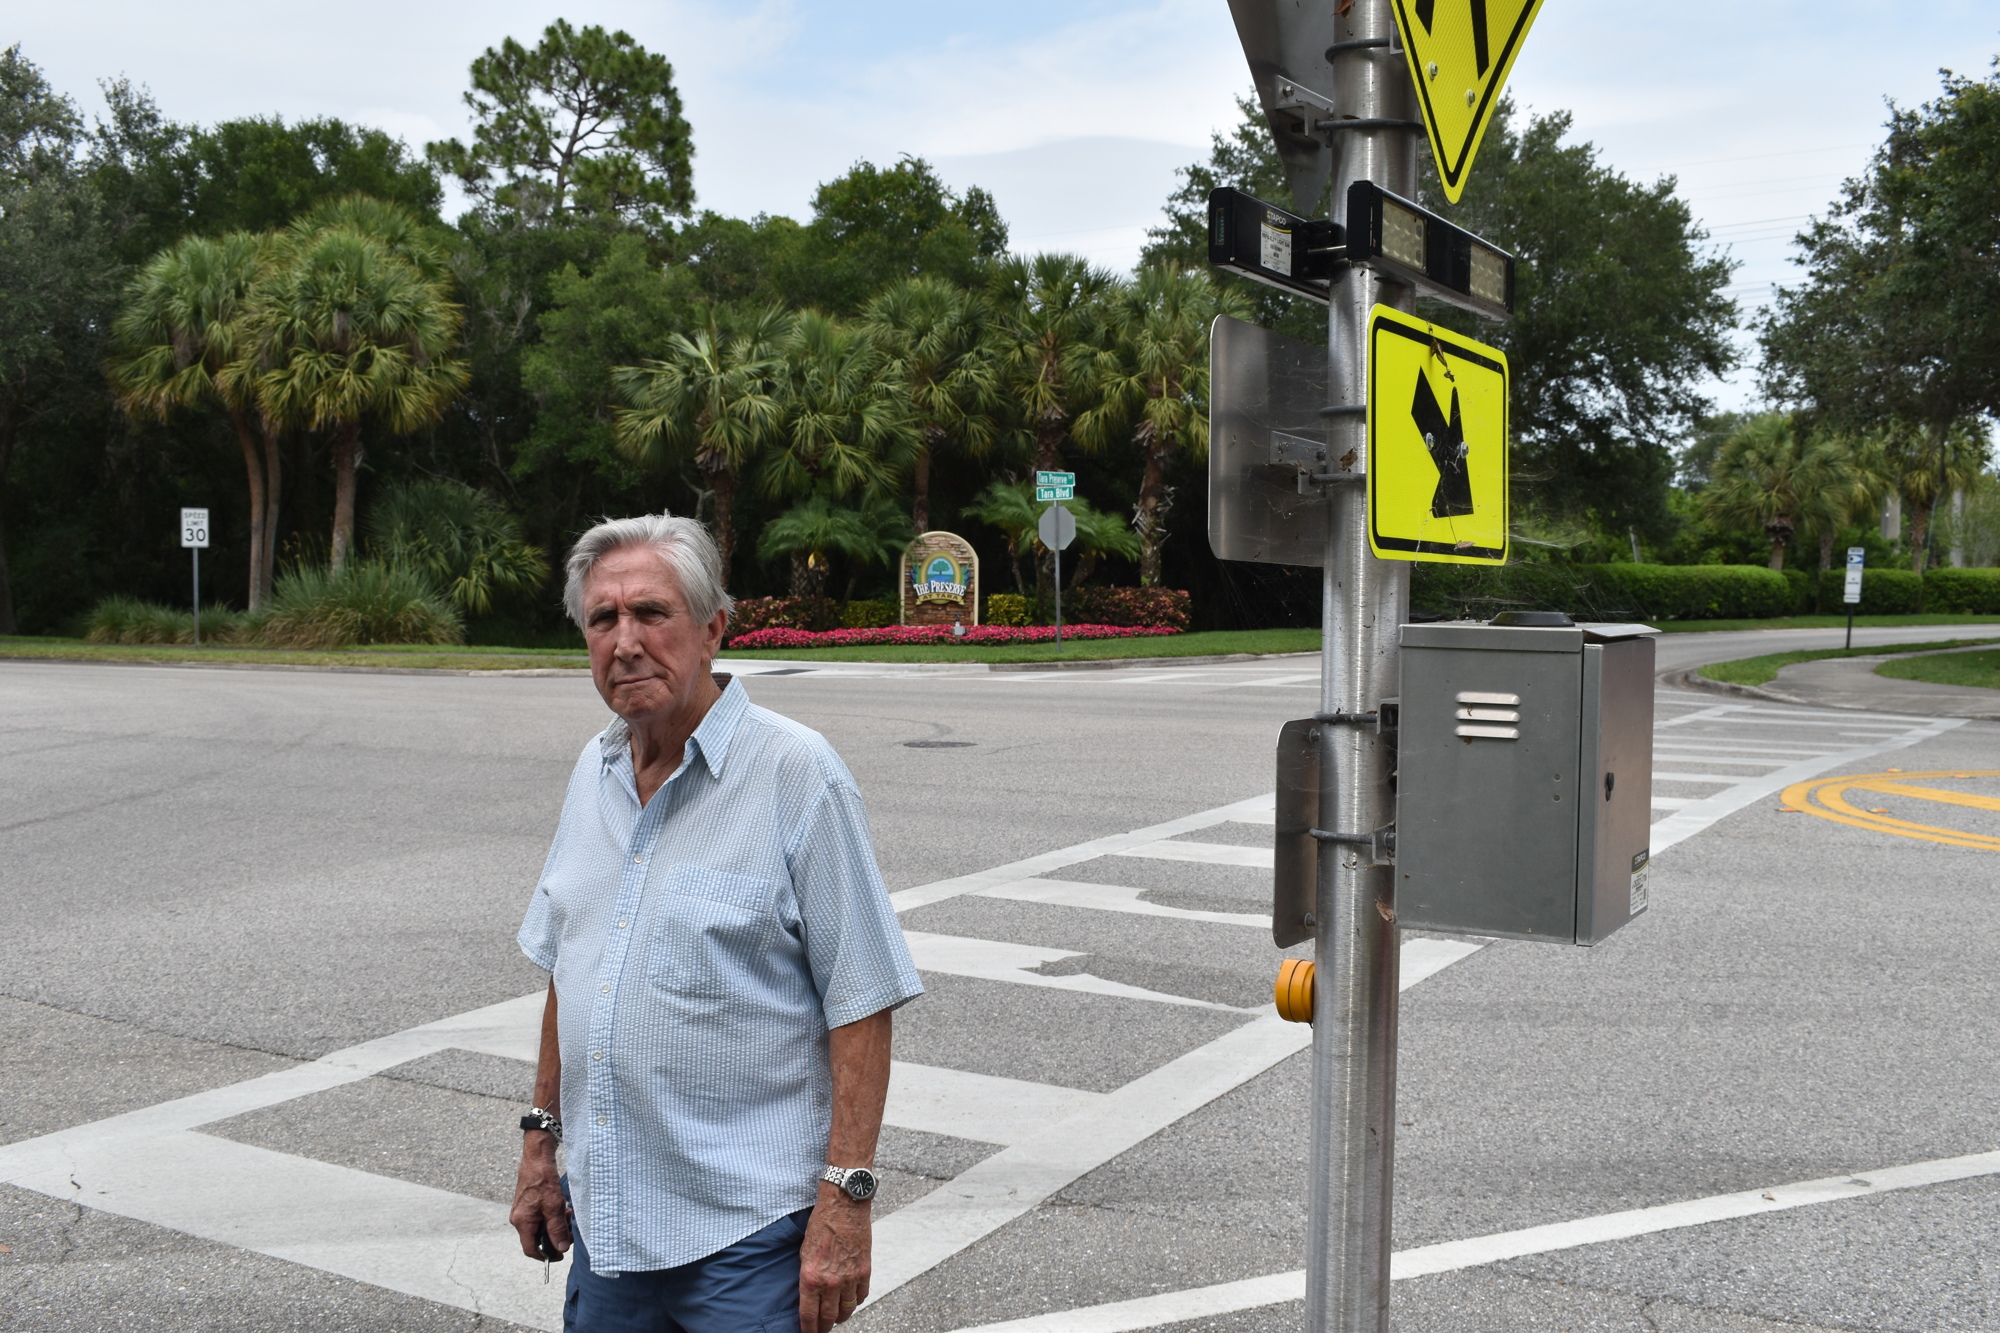 Darby Connor said the recently installed crosswalks with flashing beacons, at Tara Boulevard and Tara Preserve Lane, have made a huge difference but that more is needed.